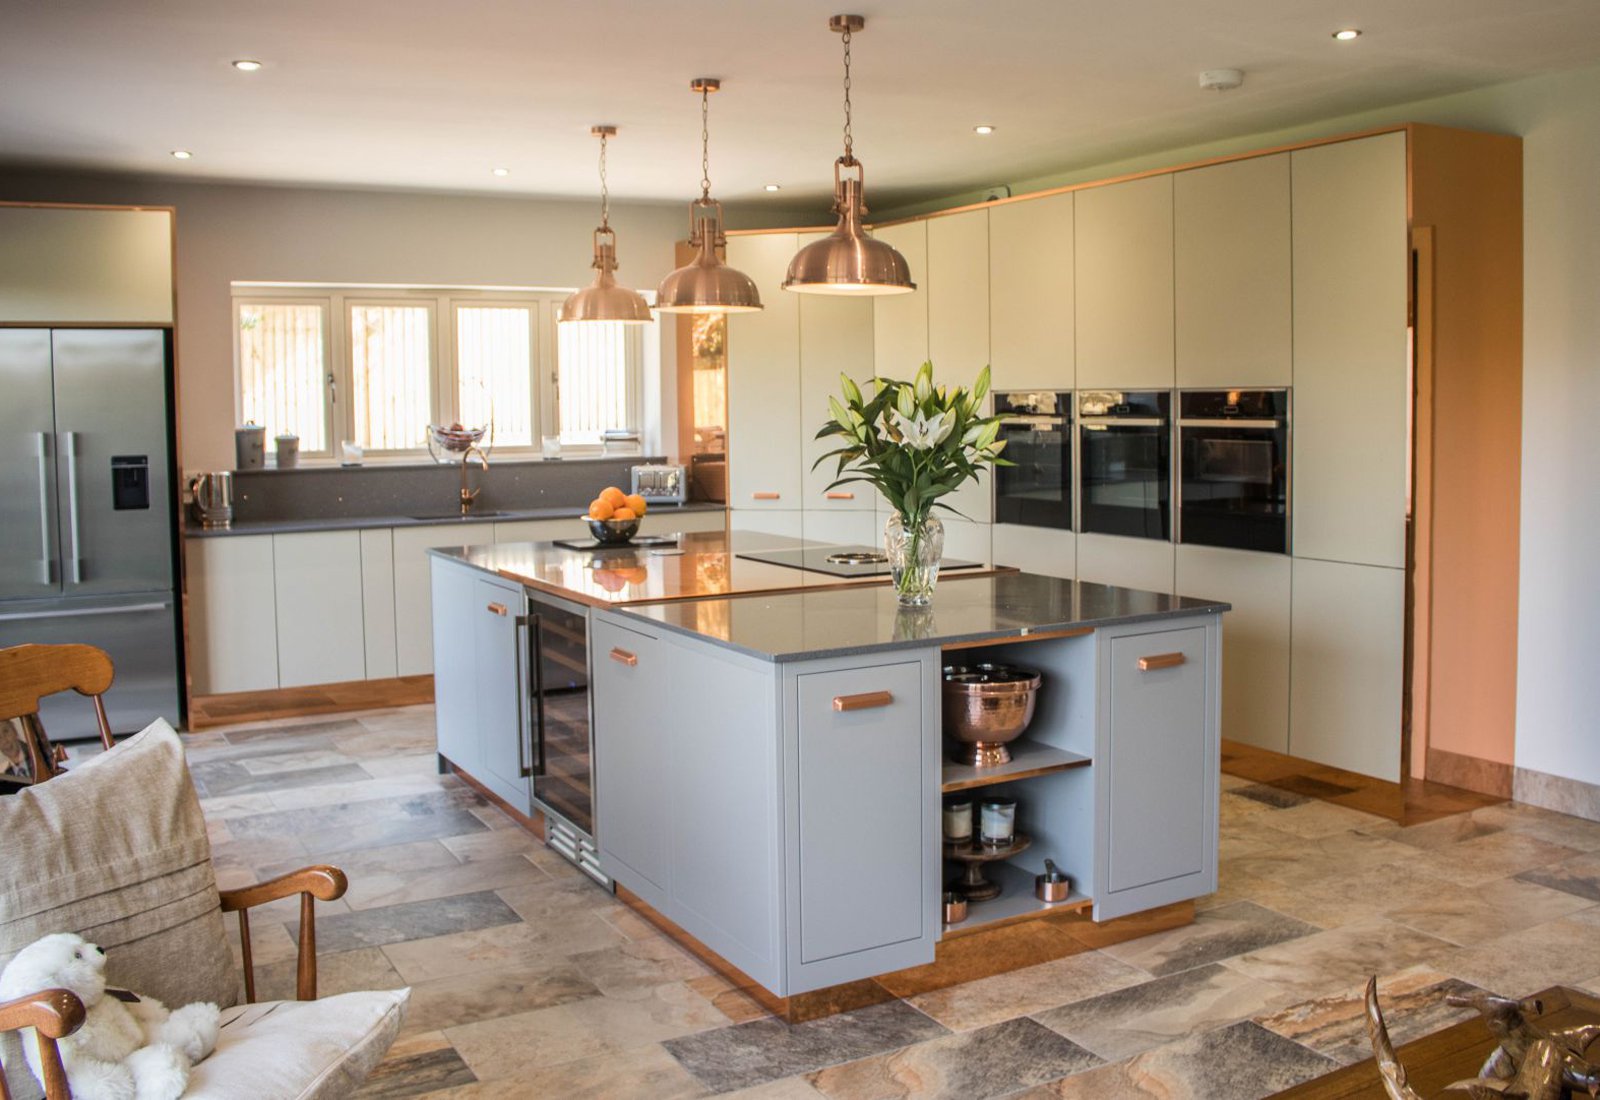  Bespoke  Contemporary Kitchens  by Kingswood